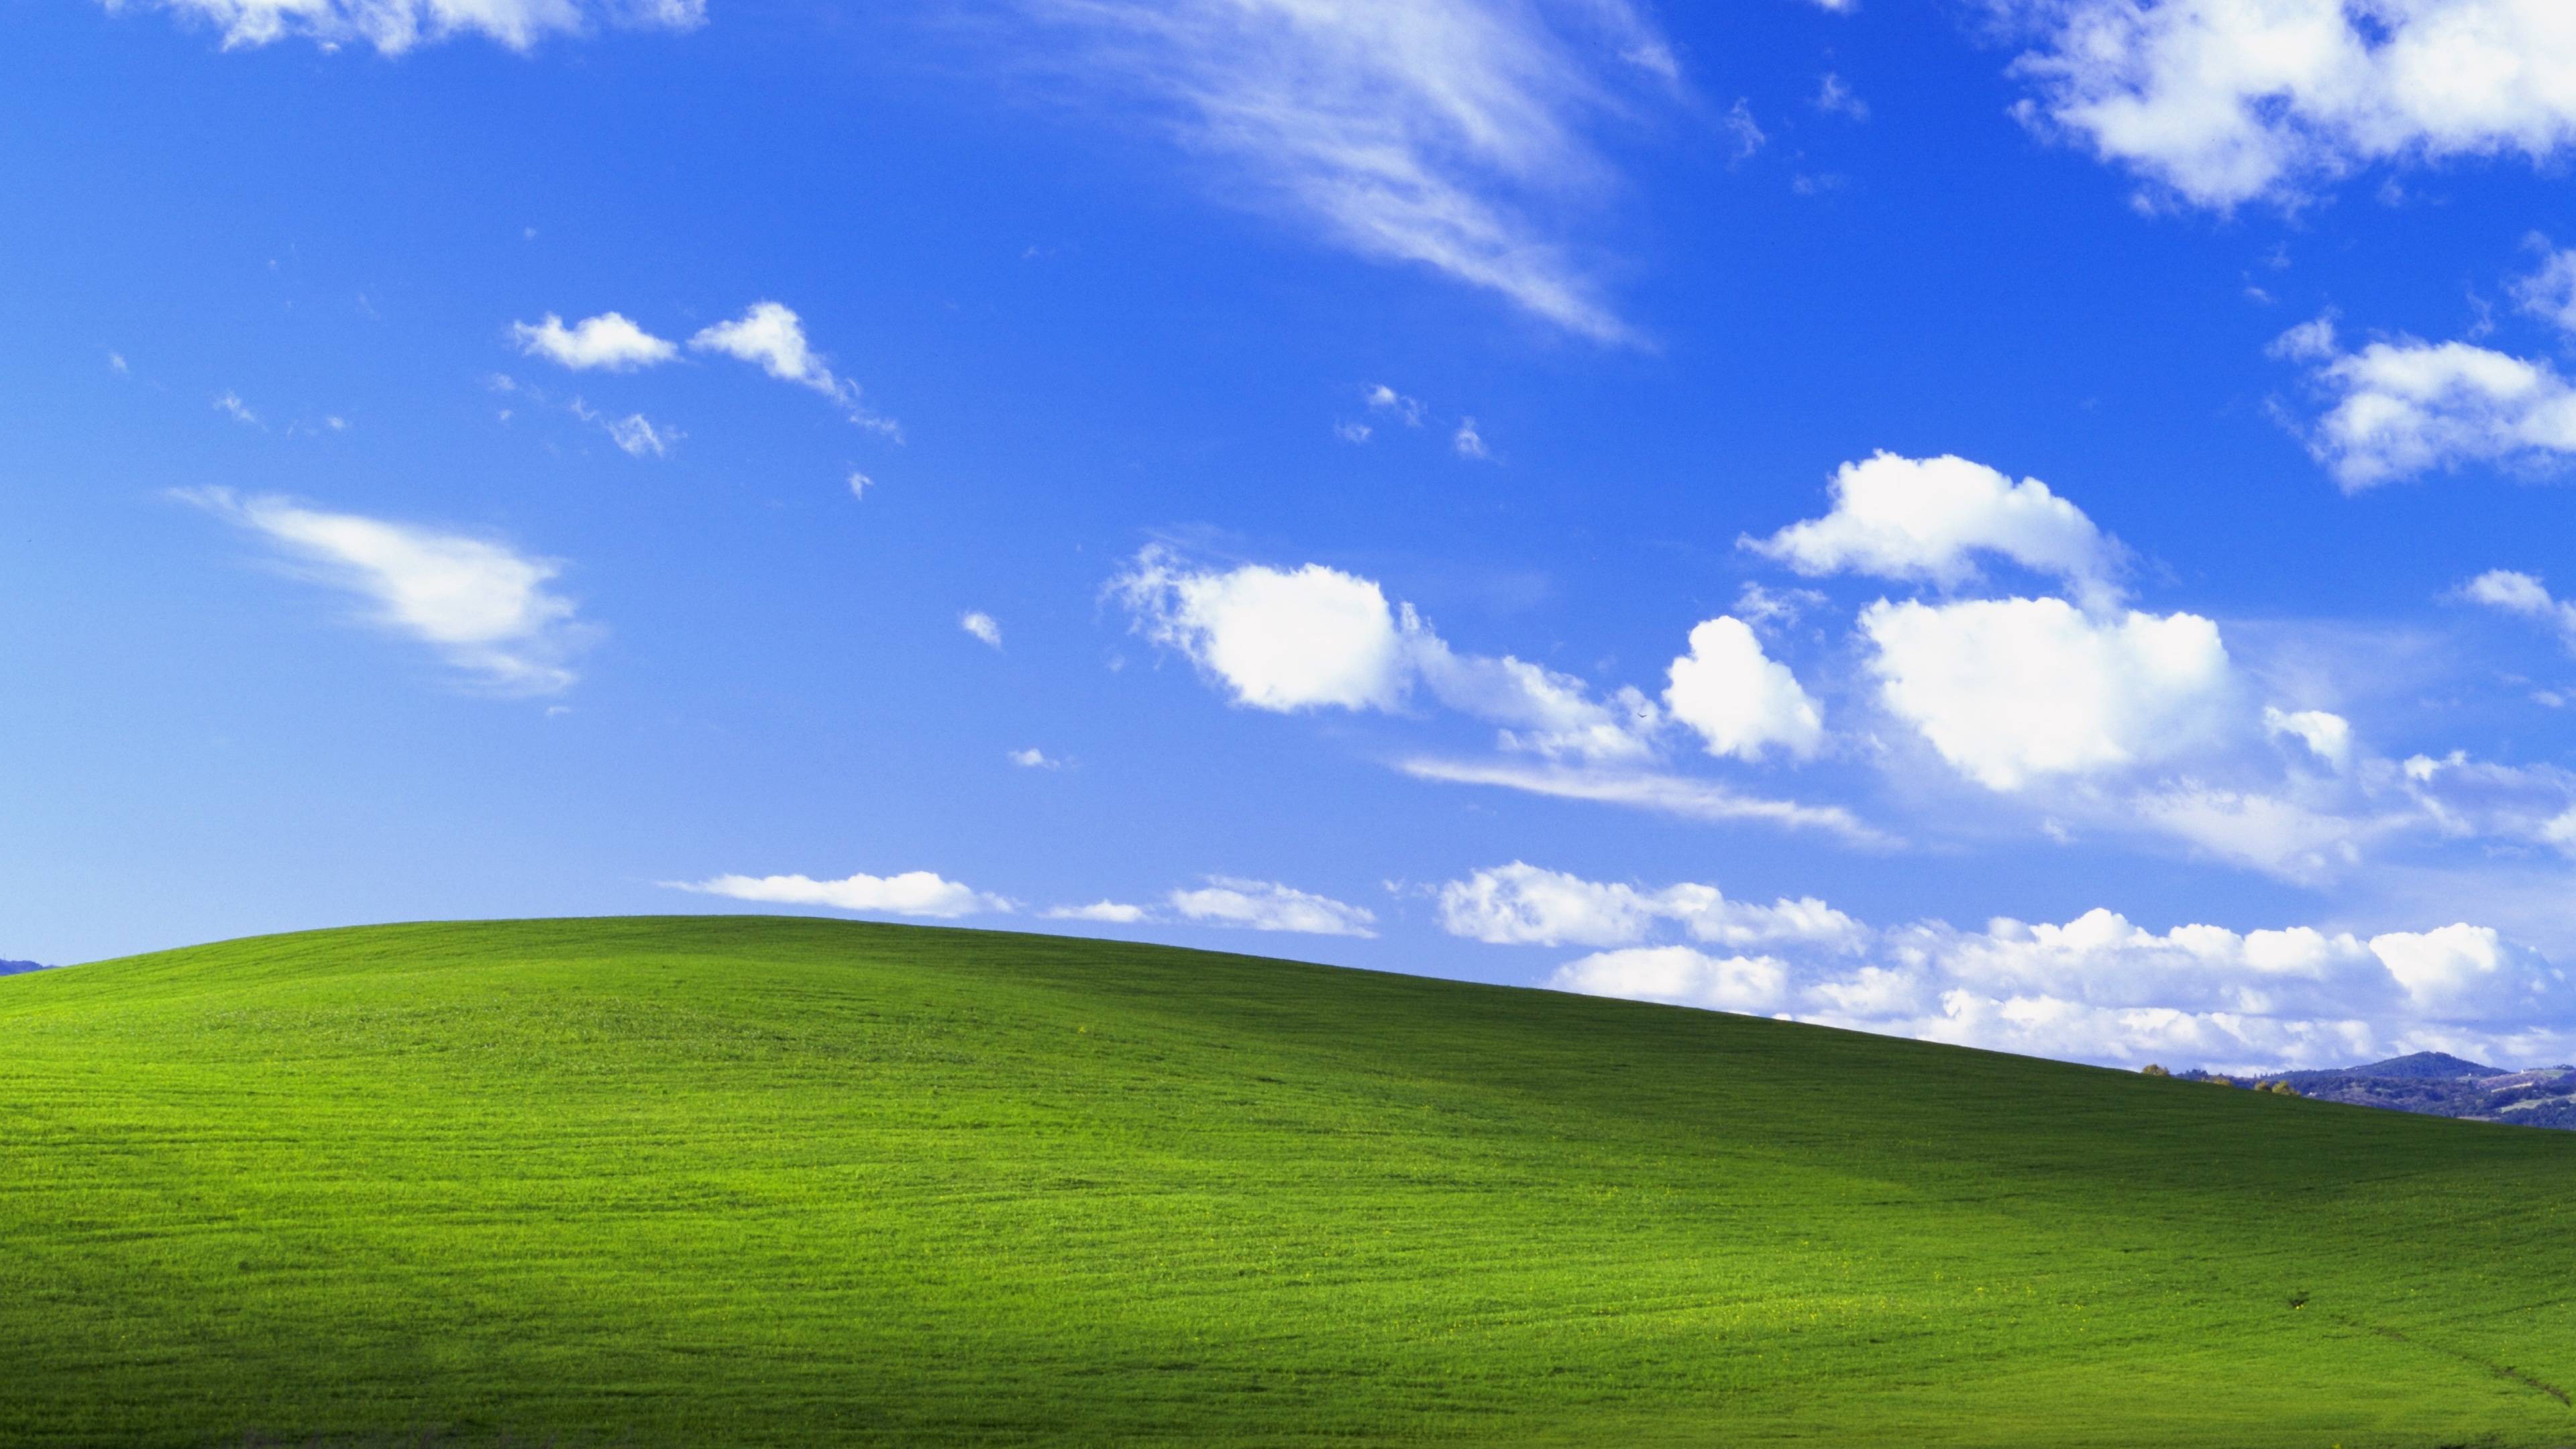 The Windows XP wallpaper at 4K resolution pcmasterrace